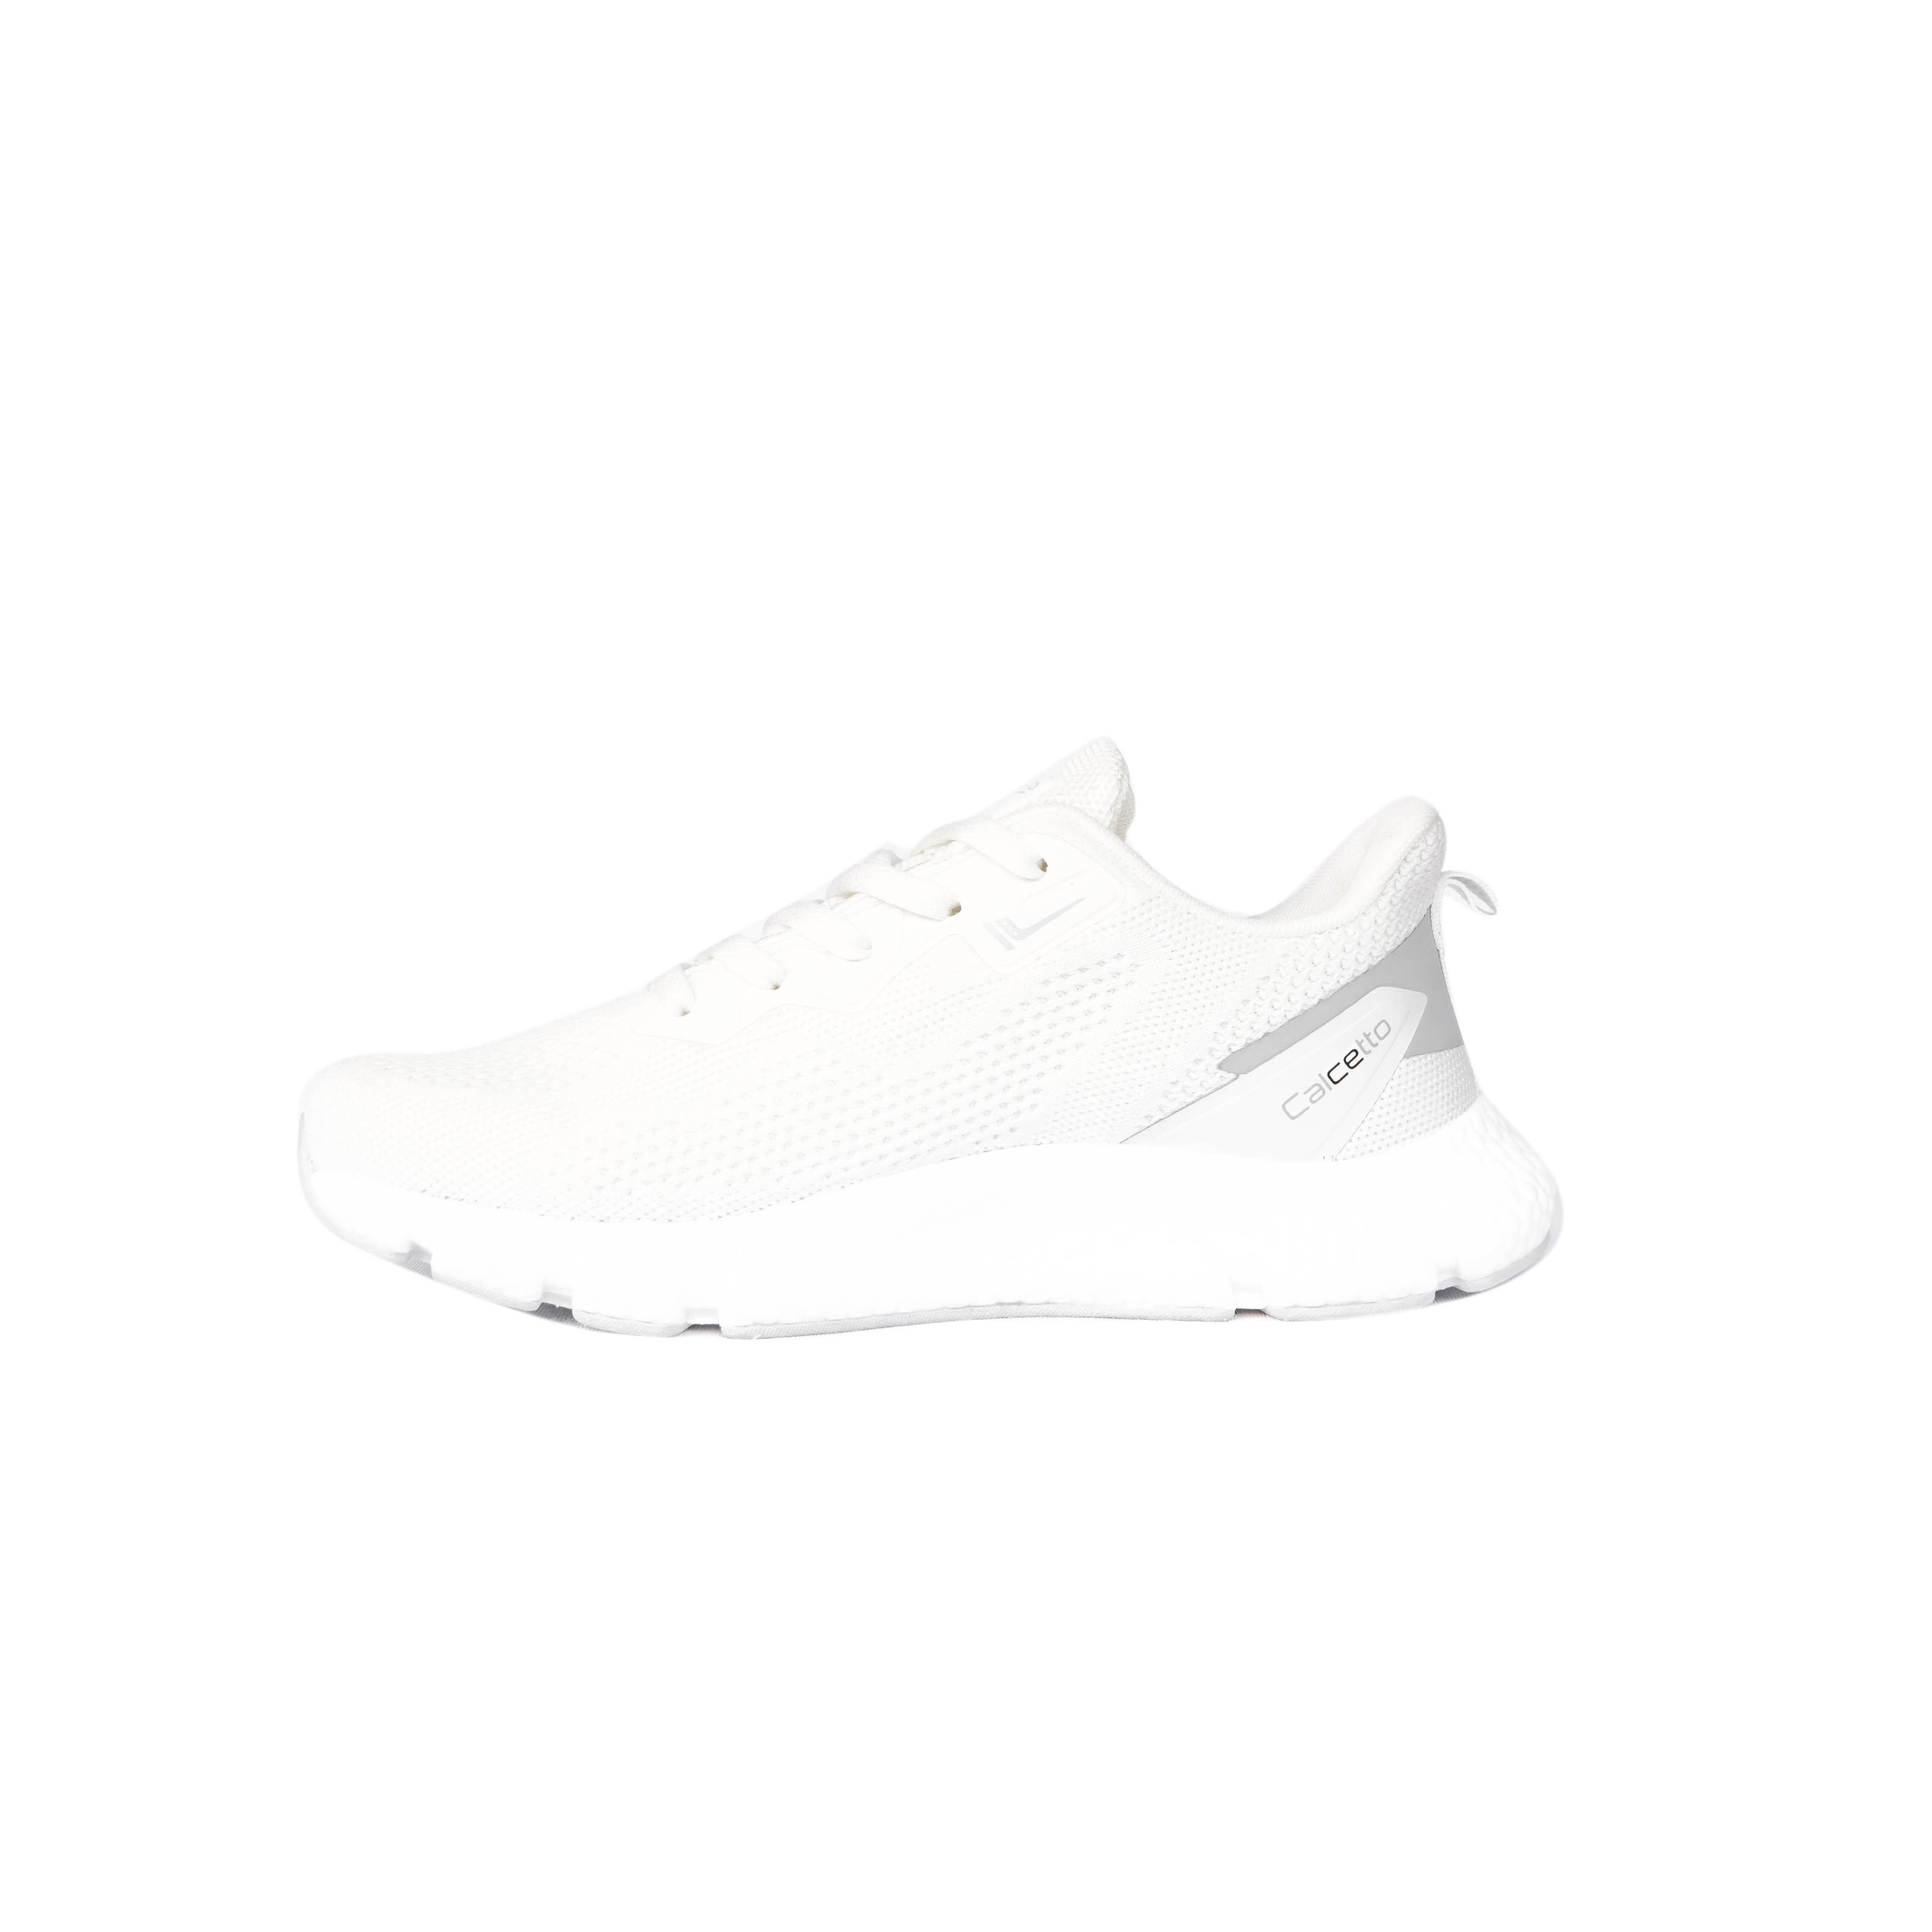 Calcetto Brand Men's Laced Running Sport Shoes CLT-956 (White) :: RAJASHOES